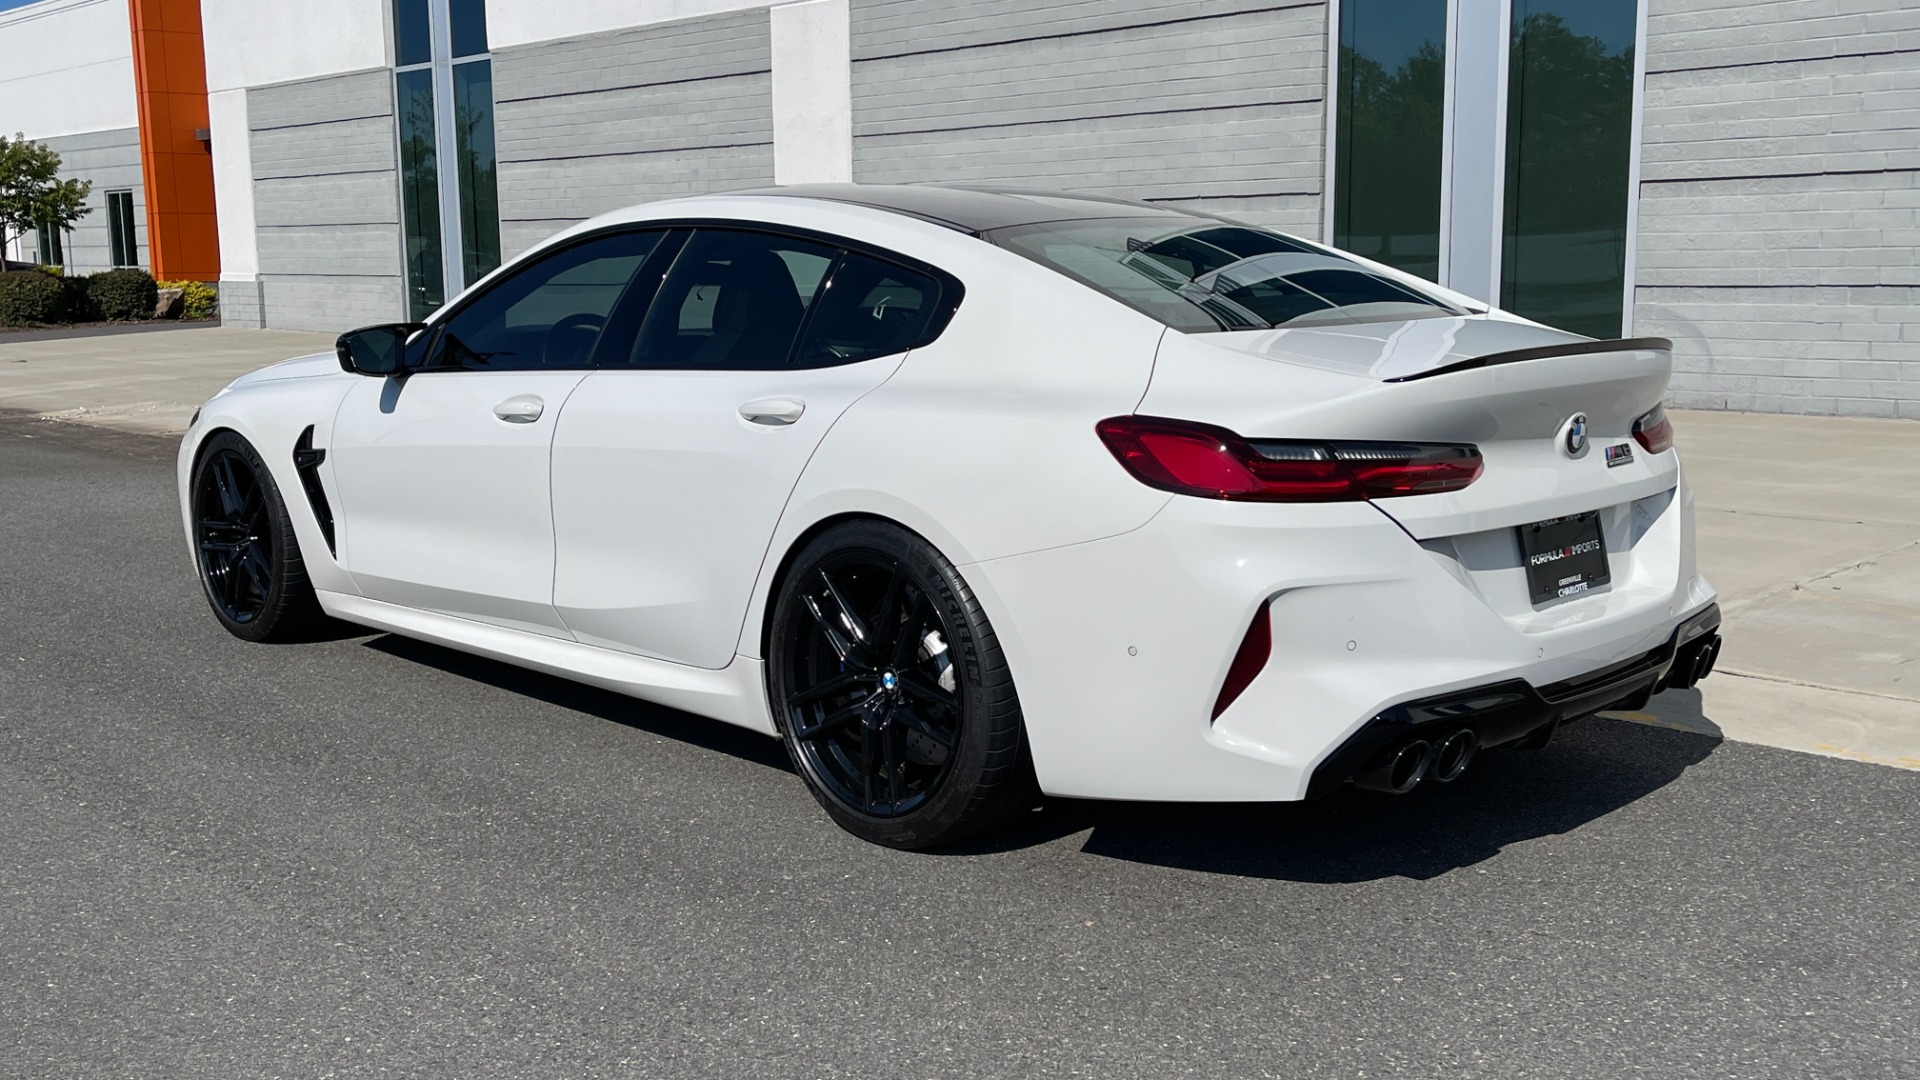 Used 2020 BMW M8 COMPETITON / TWIN TURBO / KW V3 SUSPENSION / FRONT LIFT / PPF / CERAMIC COA for sale $114,999 at Formula Imports in Charlotte NC 28227 8